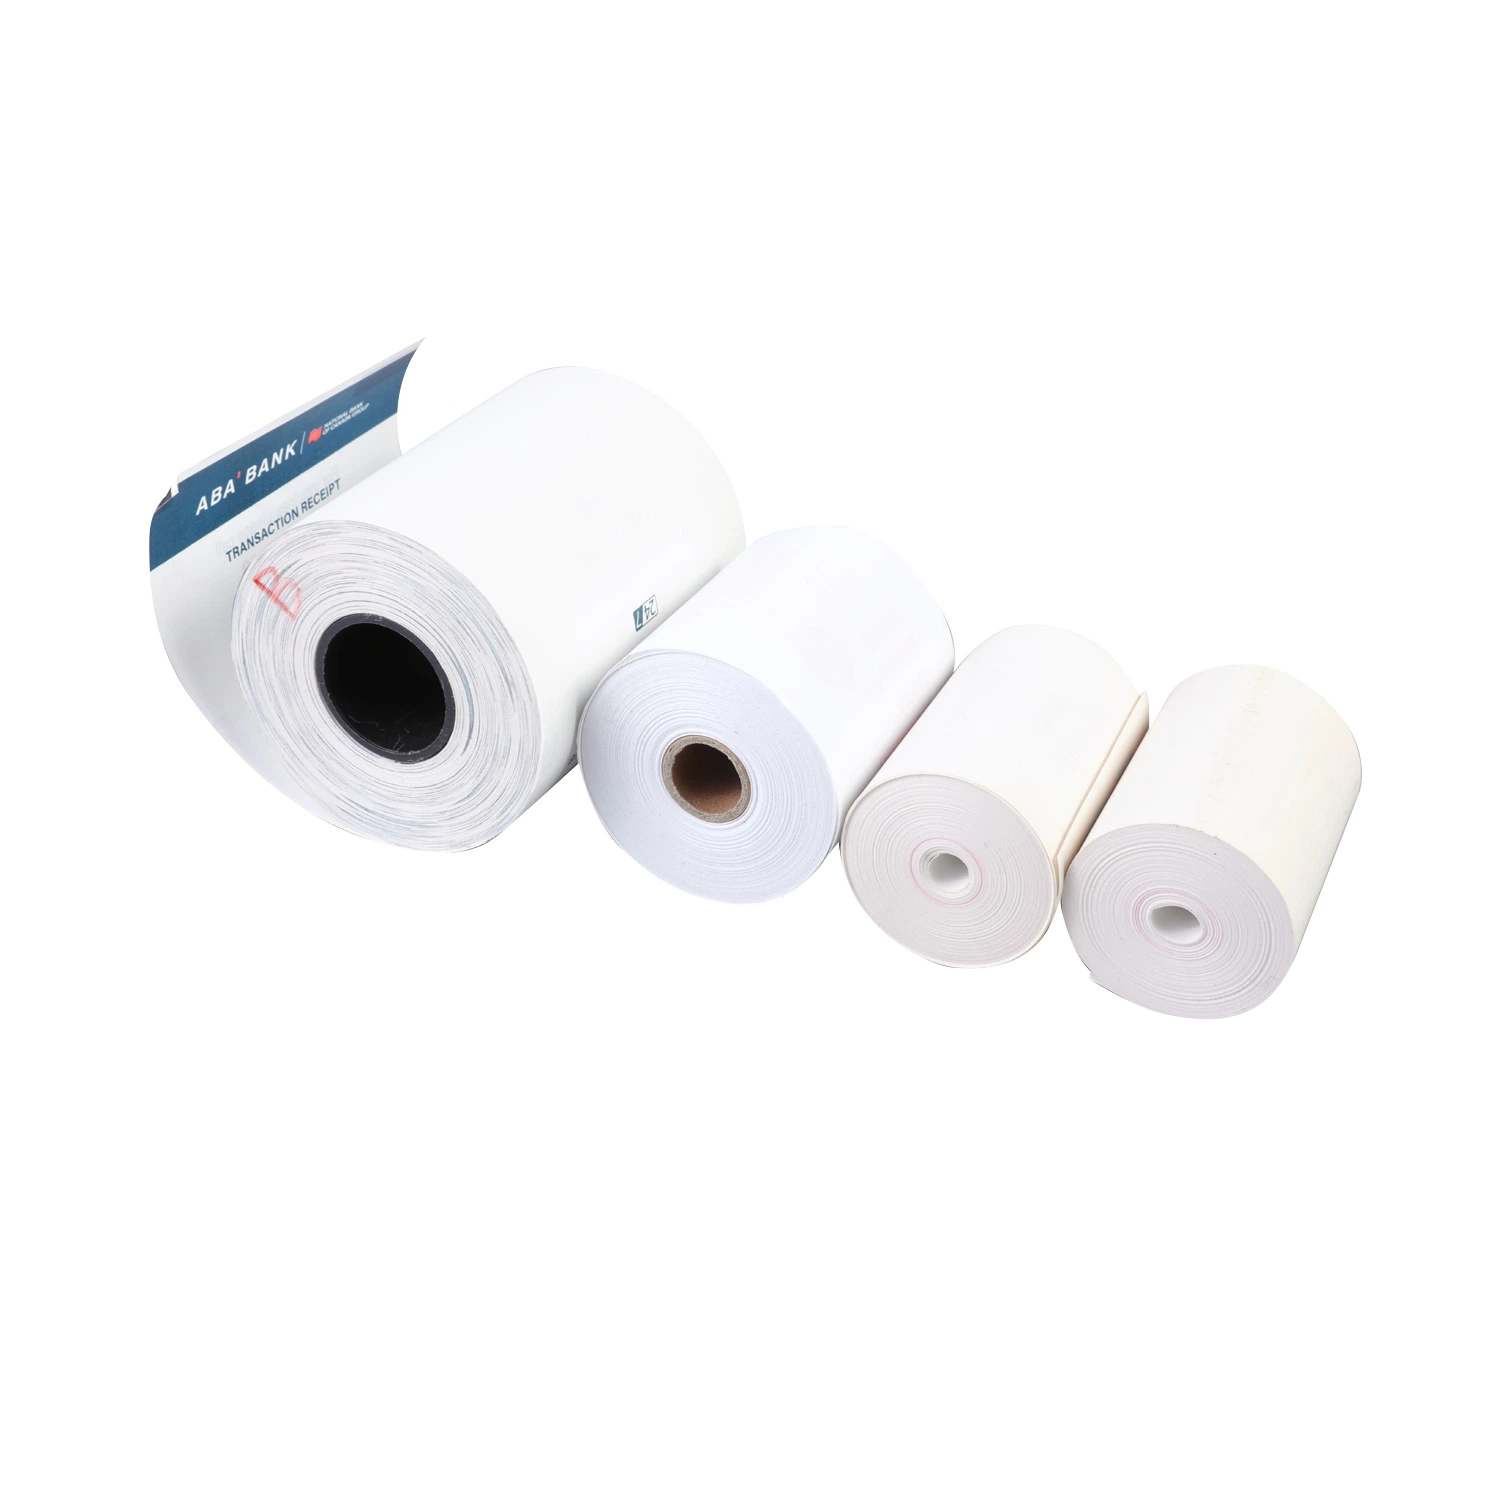 Thermal Paper in Small Rolls Used as Receipts in Banks, Shops Restaurant, Transportation 48g57